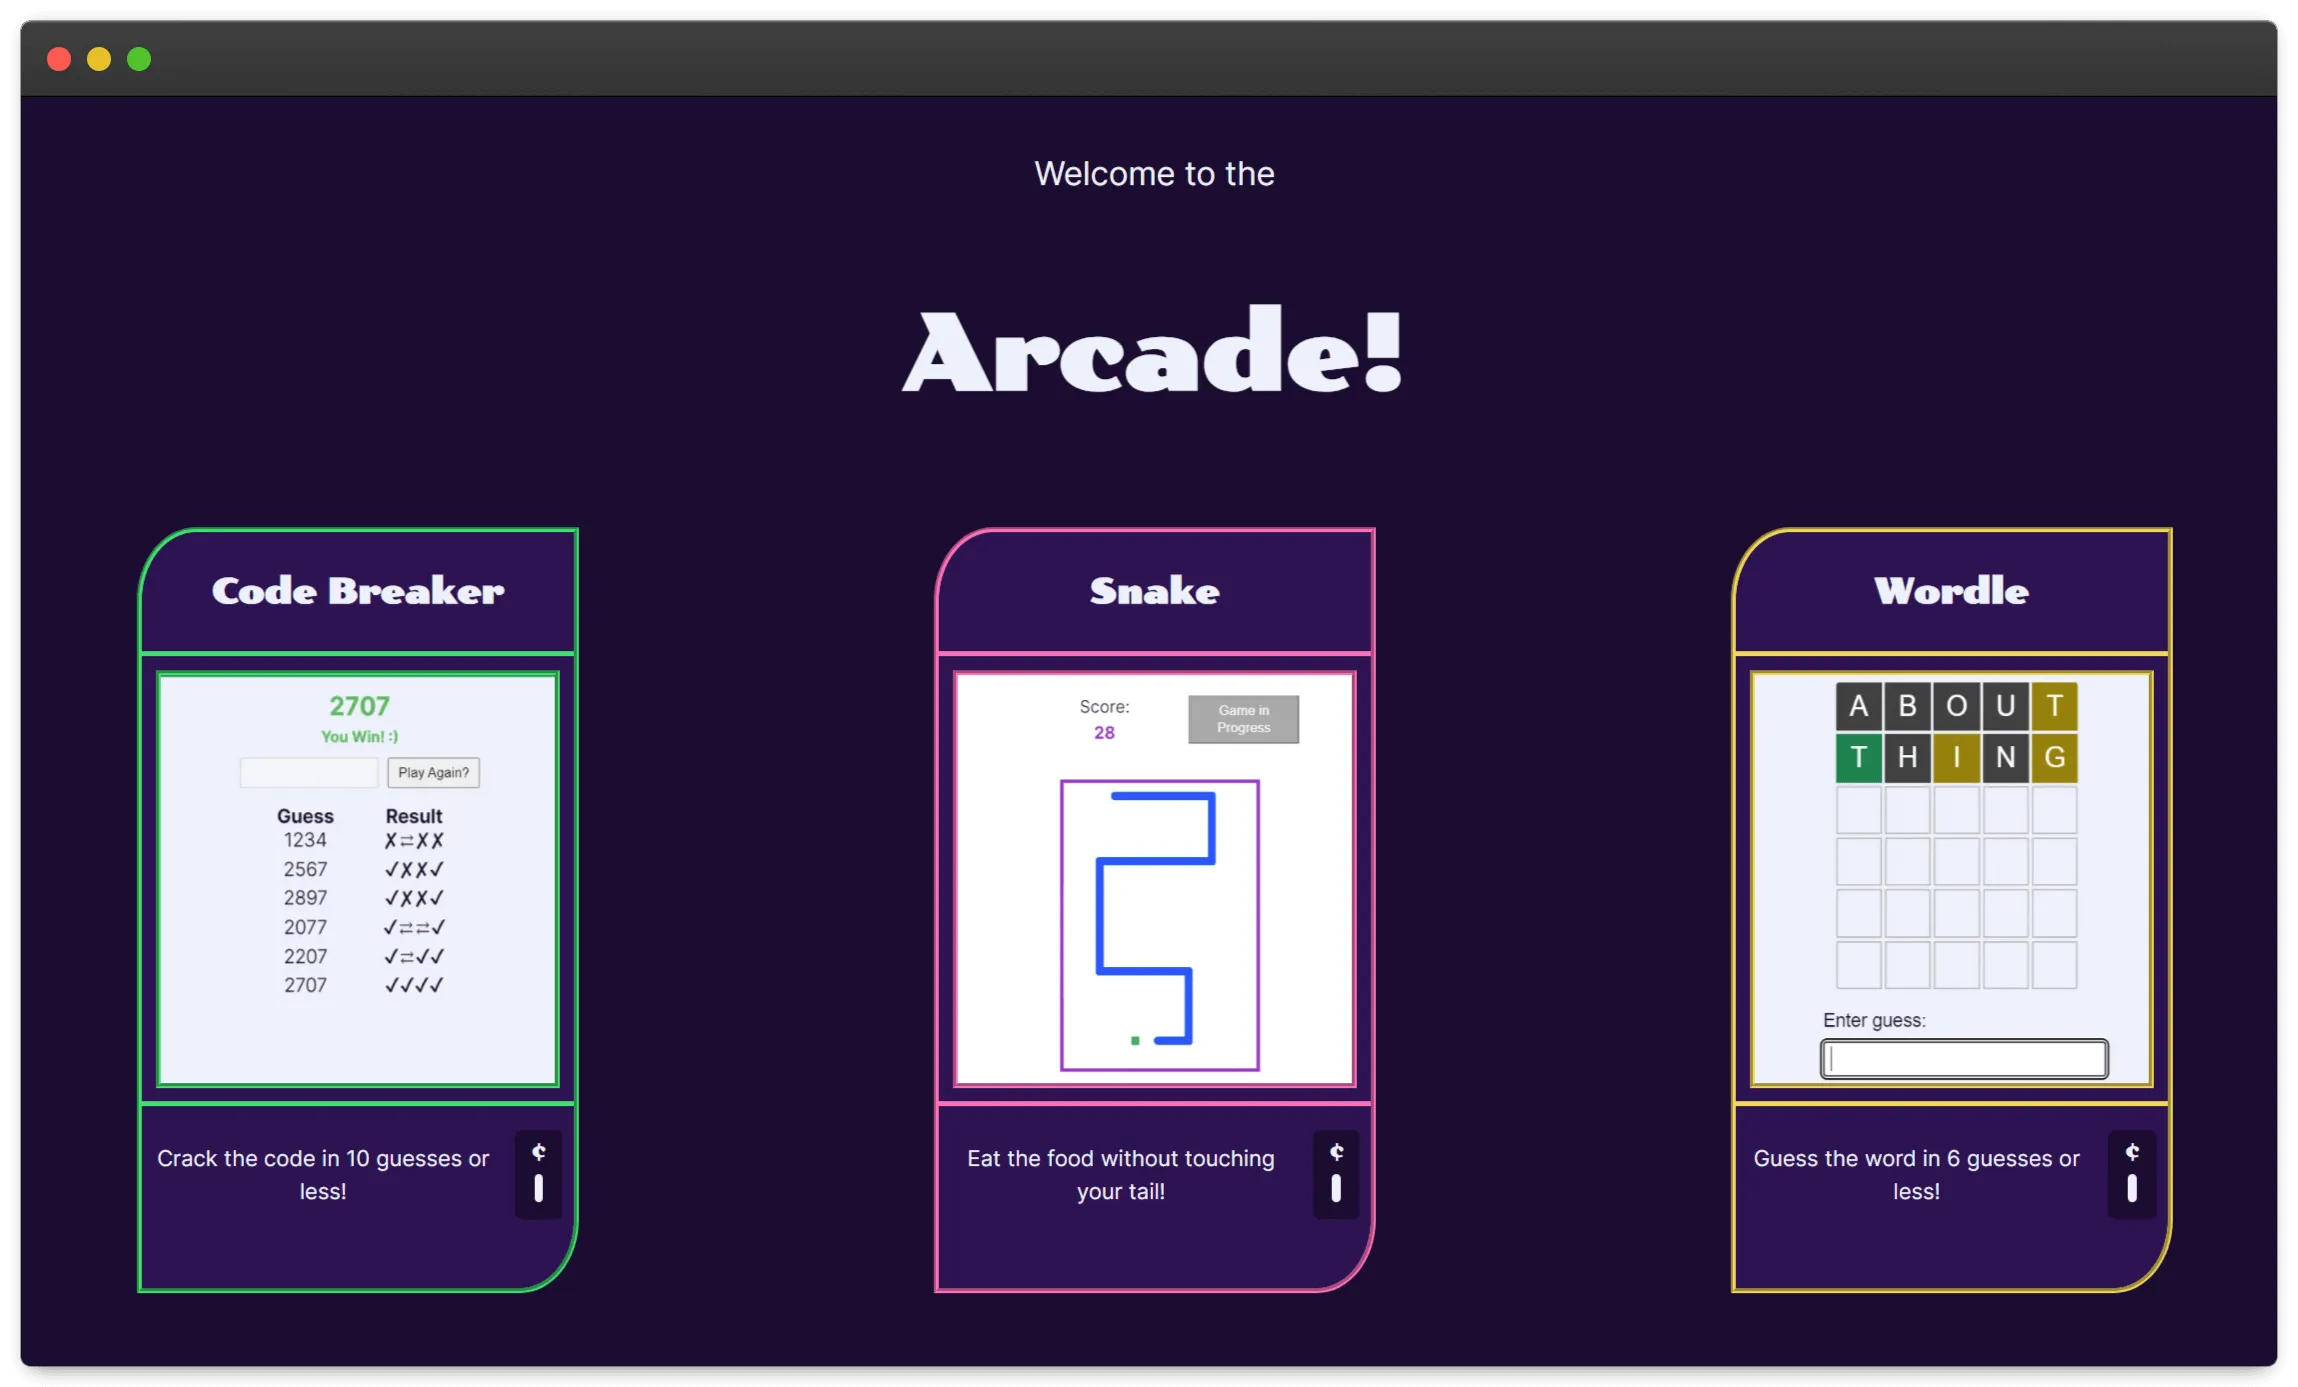 A heading reads 'Welcome to the Arcade!' on a dark purple background. Below the heading are three tall rectangles, each with the name of a game, a screenshot of the game, and a small blurb with the game objective.